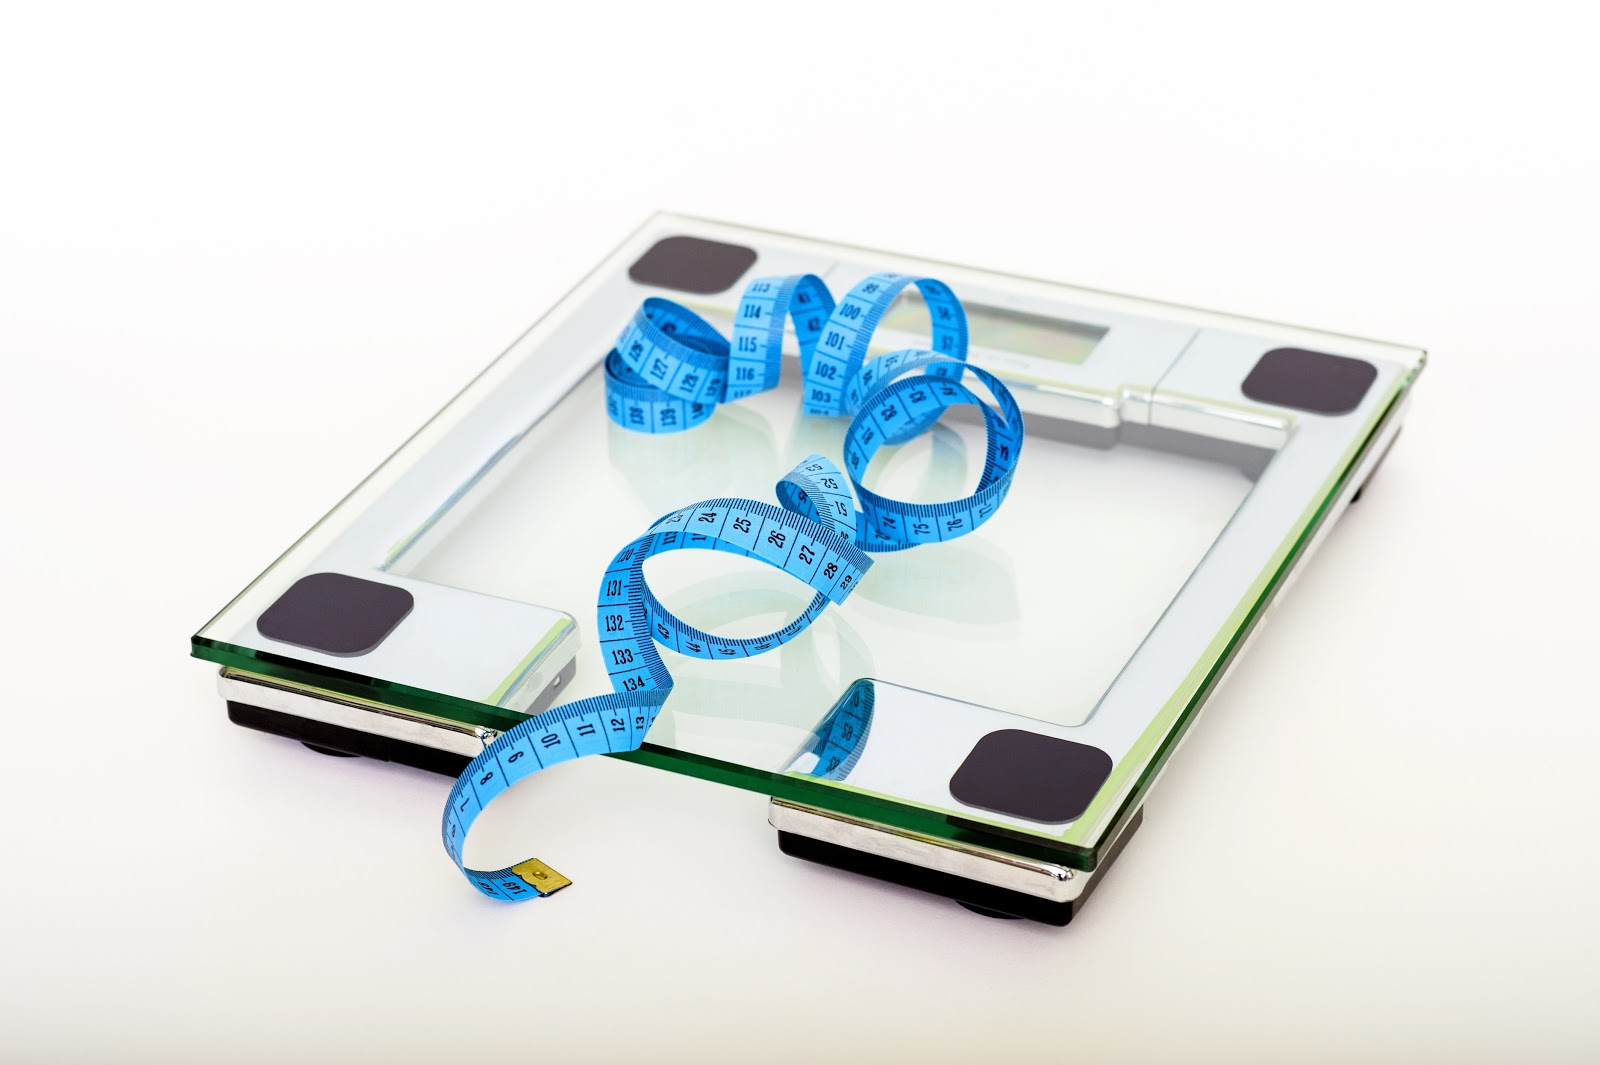 Two weight loss tools to use at home - a tape measure and a set of bathroom scales